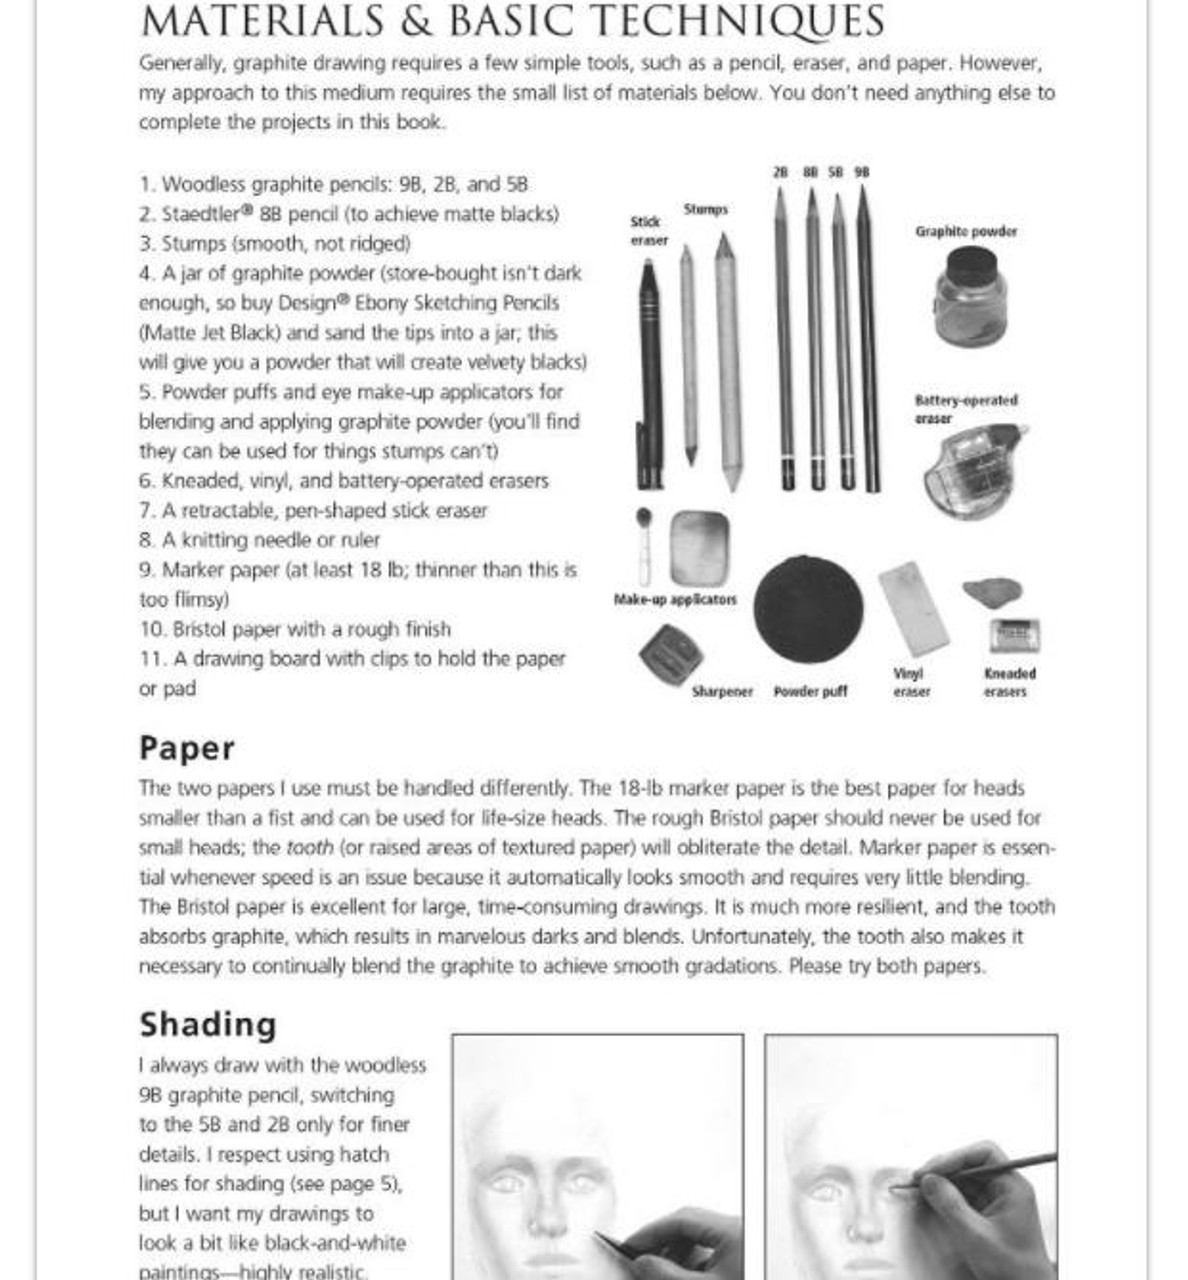 Drawing Supplies & Materials: A List For Beginners Learning How To